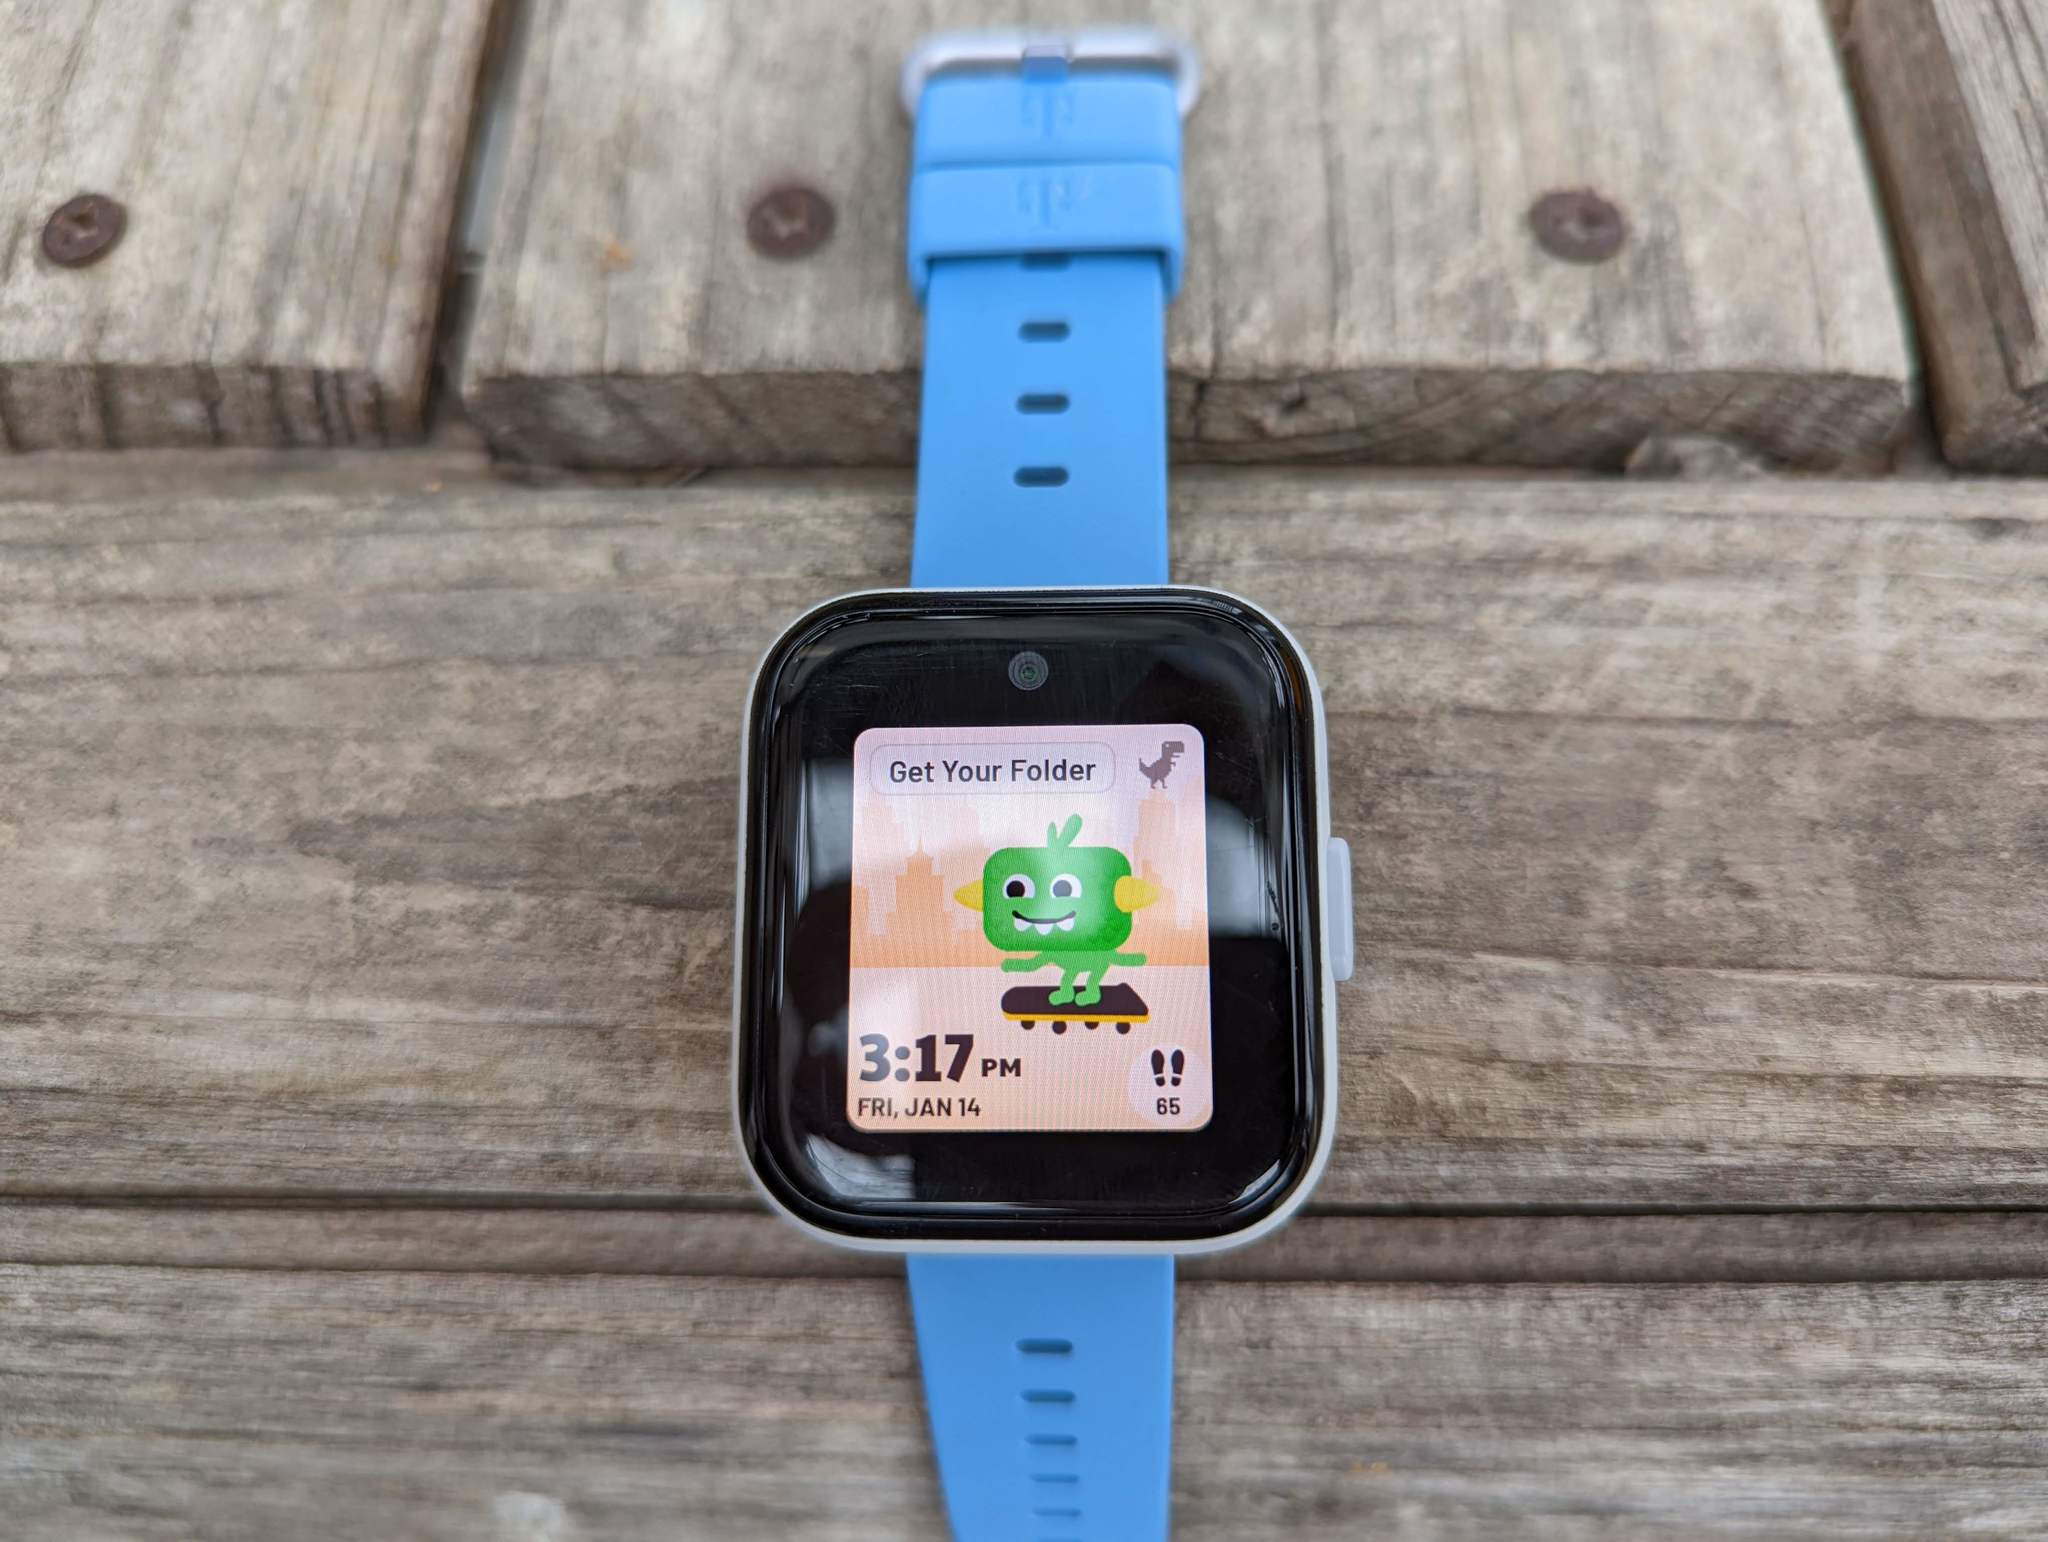 Review: The T-Mobile SyncUP Kids watch is an almost complete package